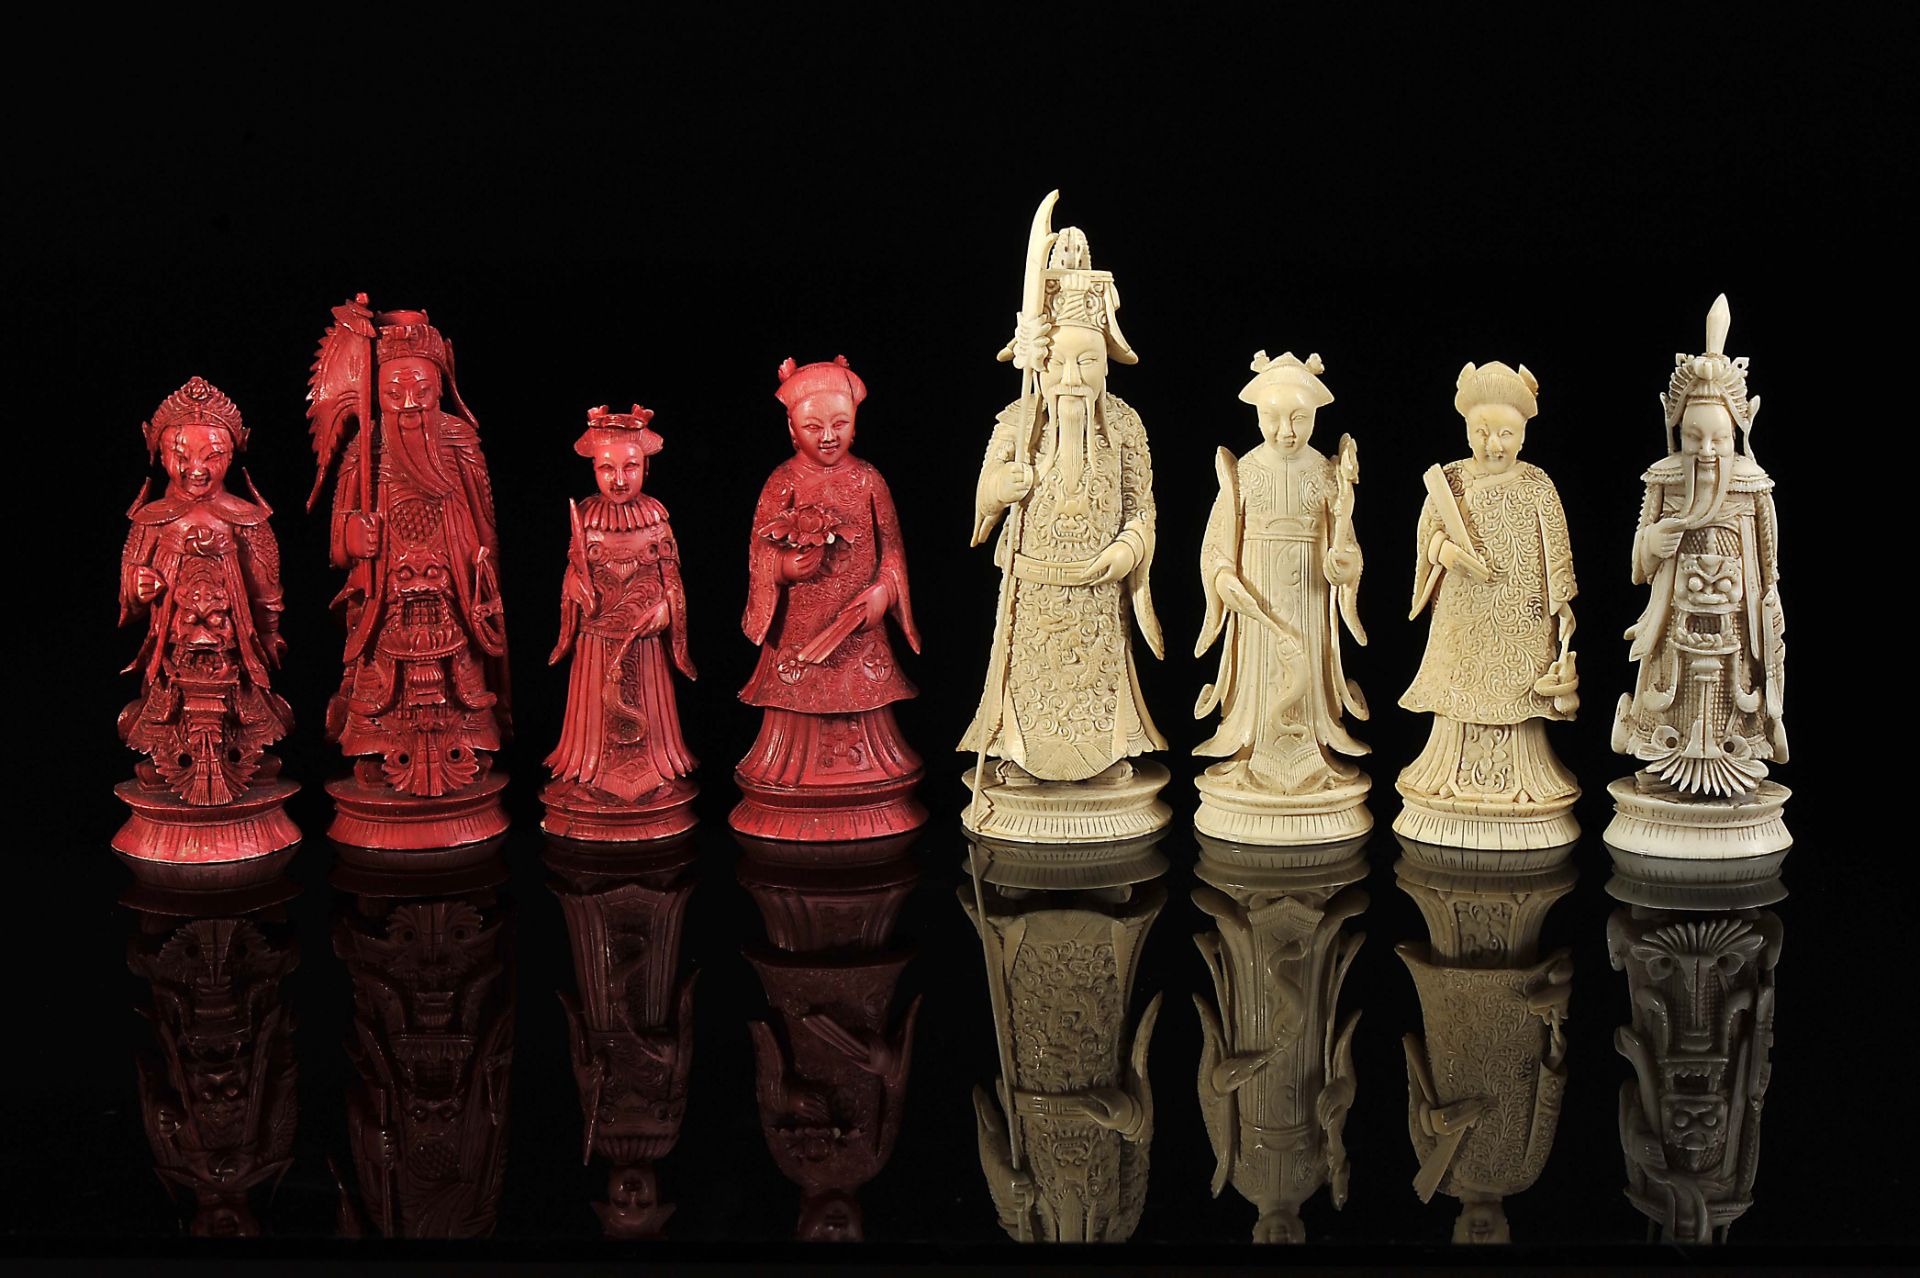 Eight Chess Pieces, "Four Kings" and "Four Queens"